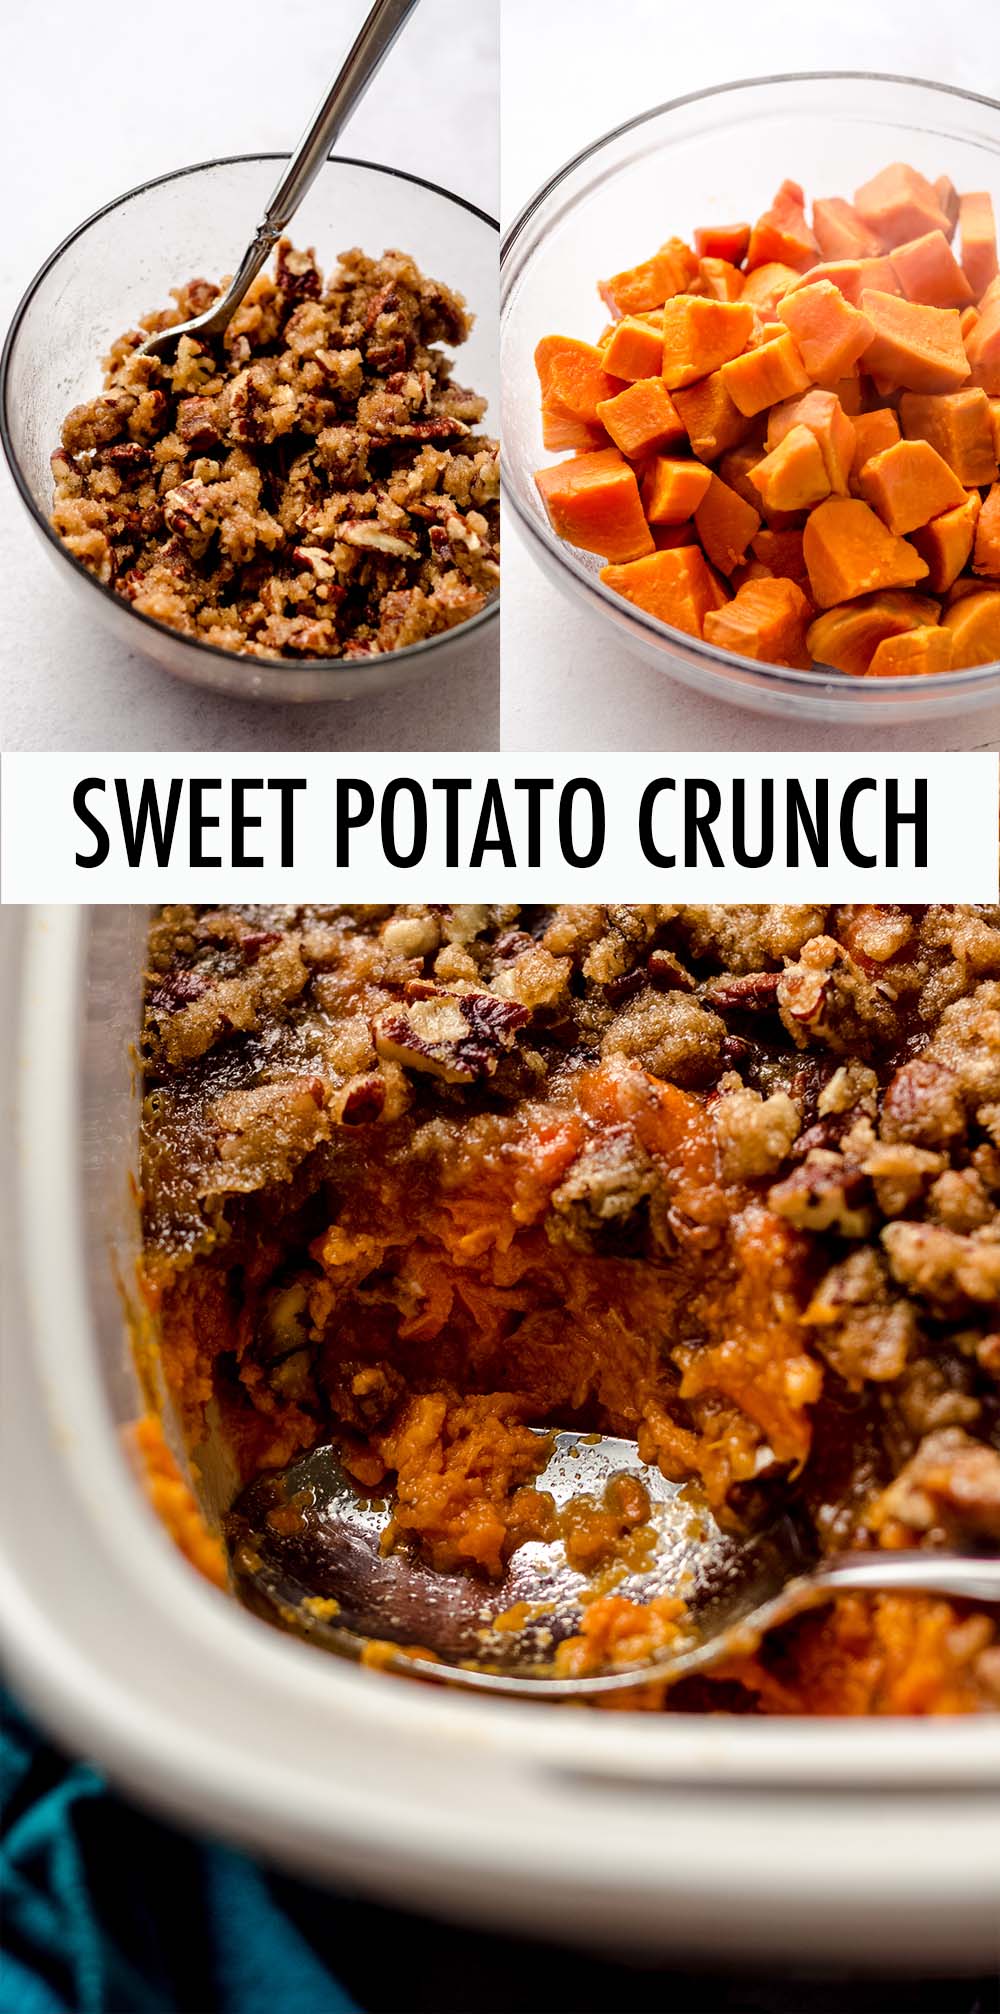 This easy sweet potato casserole is full of sweet and buttery mashed sweet potatoes and topped with a sweet, salty, and crunchy pecan topping. via @frshaprilflours